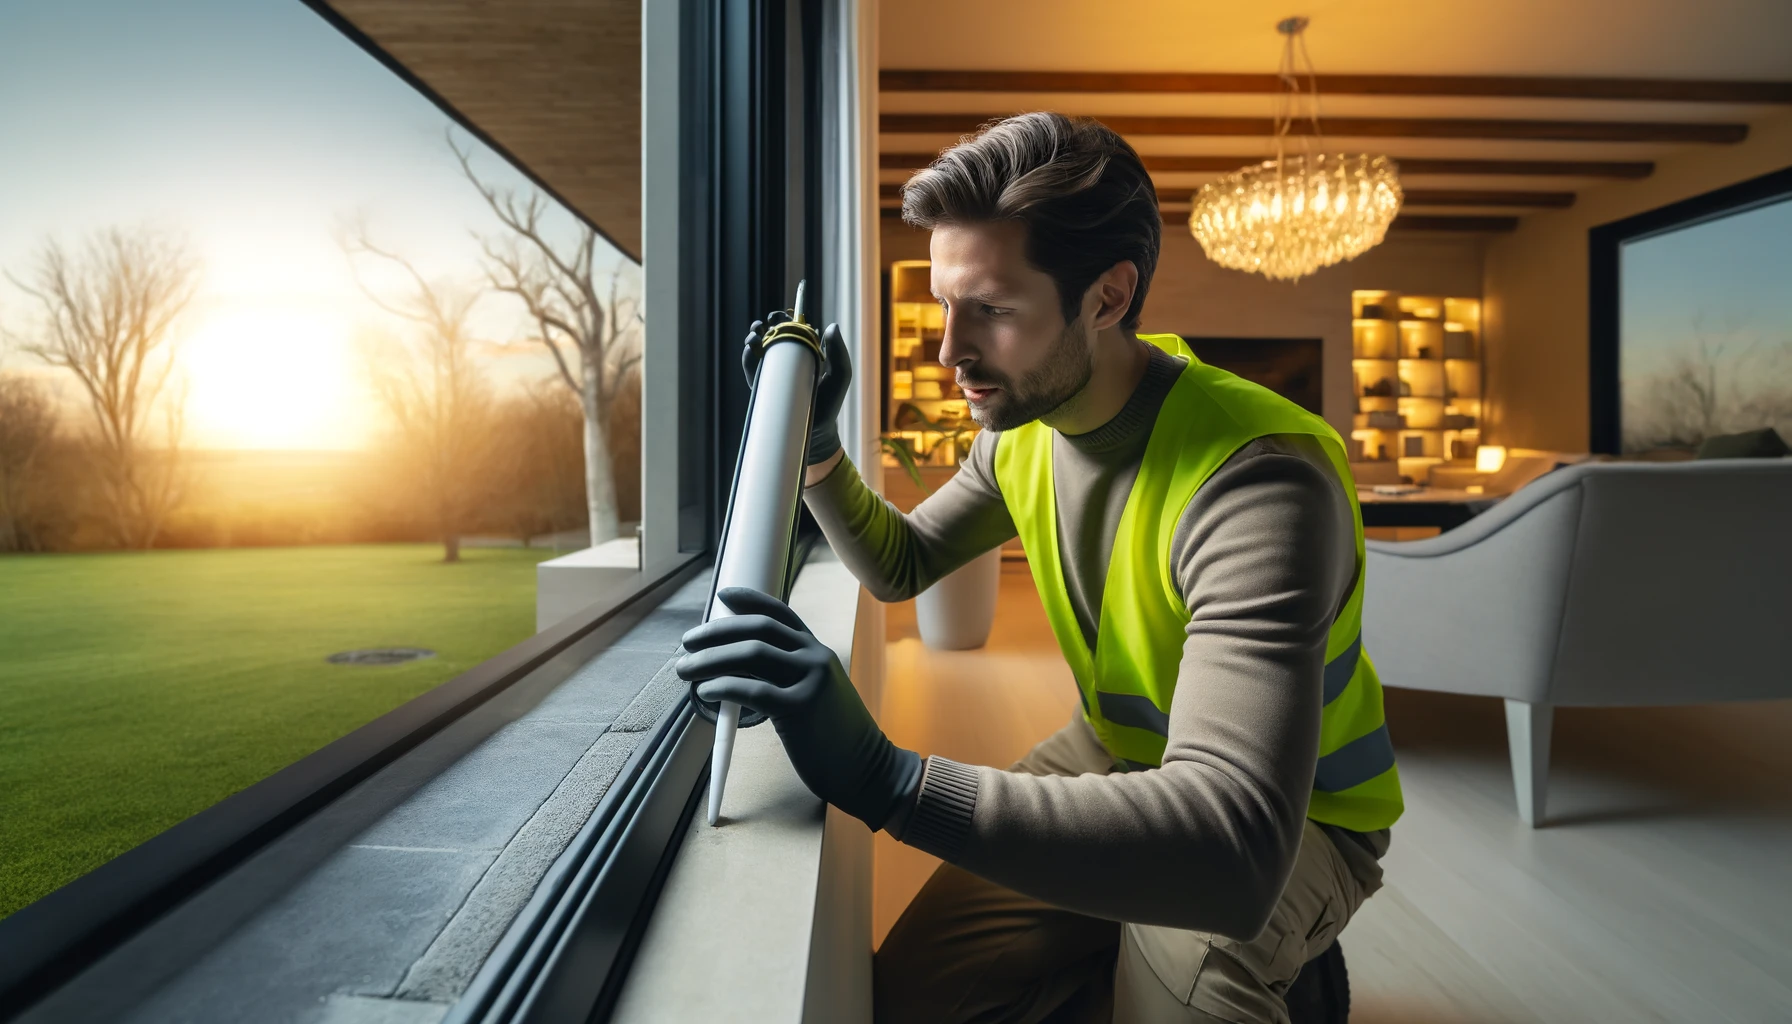 A professional man wearing work clothes and a high visibility vest, applying caulking to a window inside a modern home. This image is about Professional Caulking Services